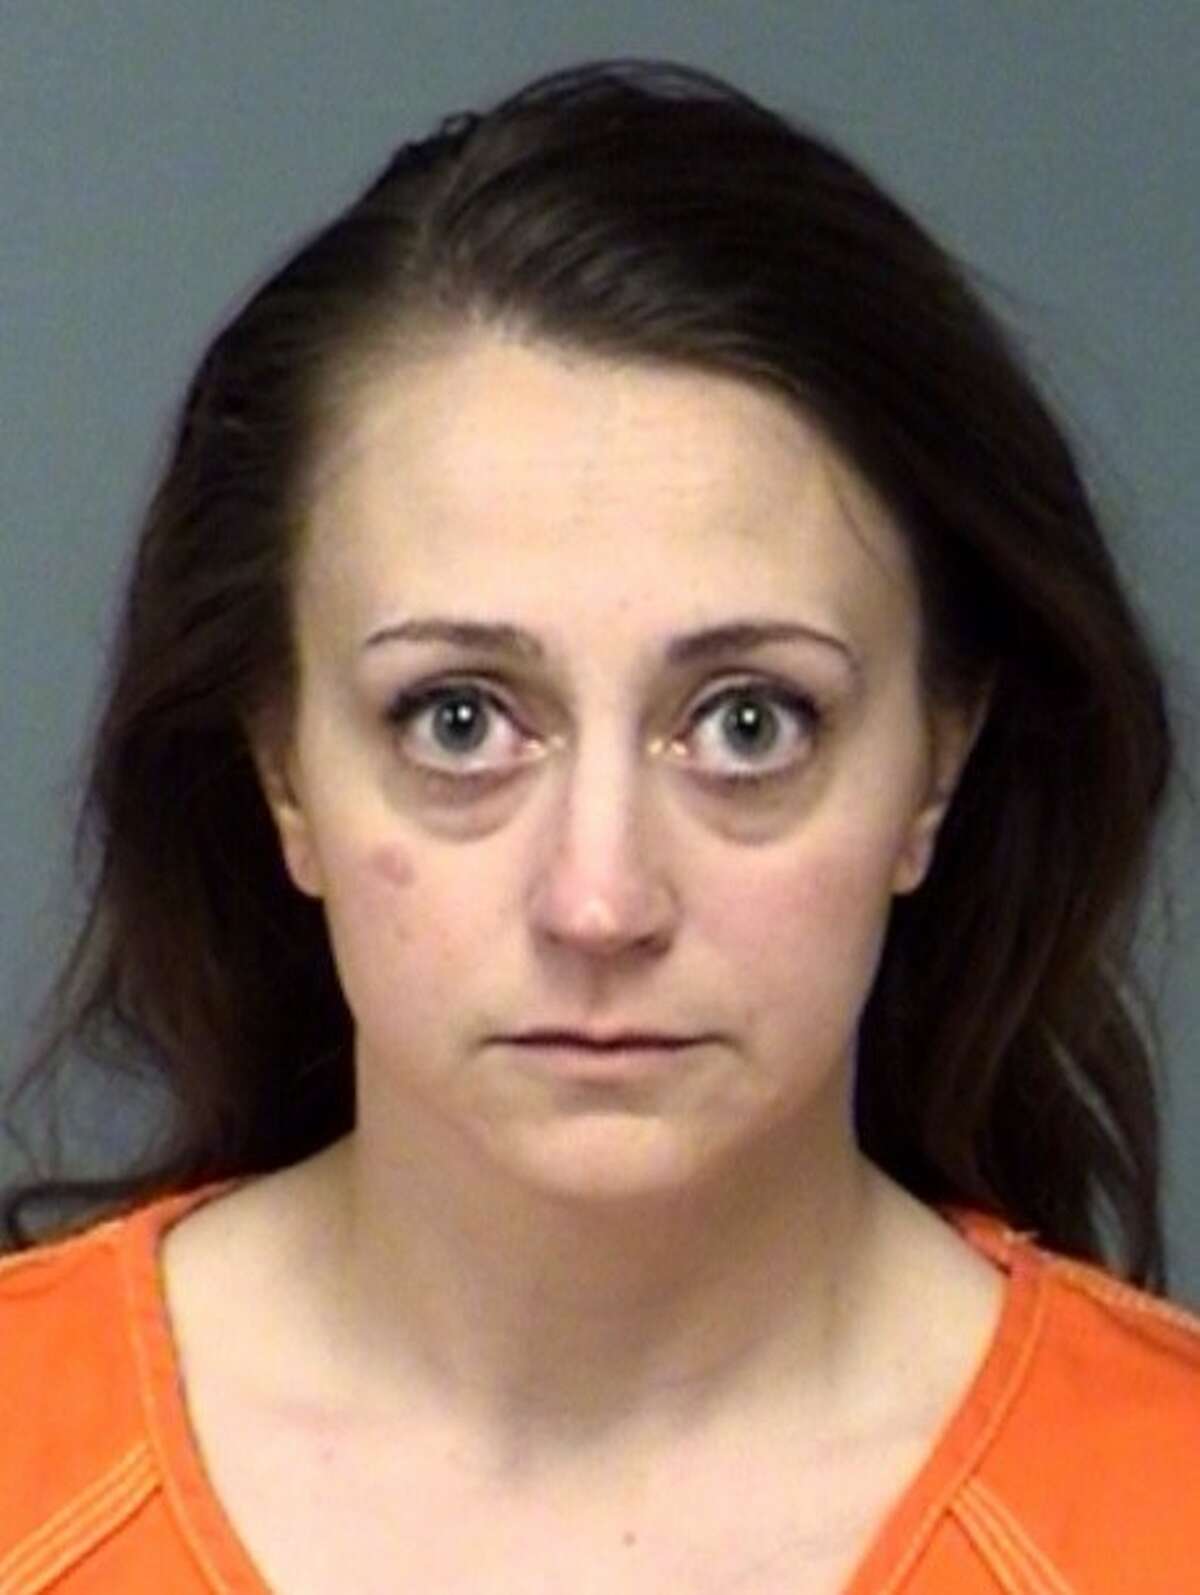 Deanna Reese, a web-and-digital graphics teacher at Poteet High School in Mesquite, was arrested at the school May 14, 2015, after a member of Mesquite Independent School District's administration contacted a school resource officer with a tip about the alleged relationship. Mesquite police said in a news release that Reese had sexual relations with an 18-year-old male student on April 10, 2015.